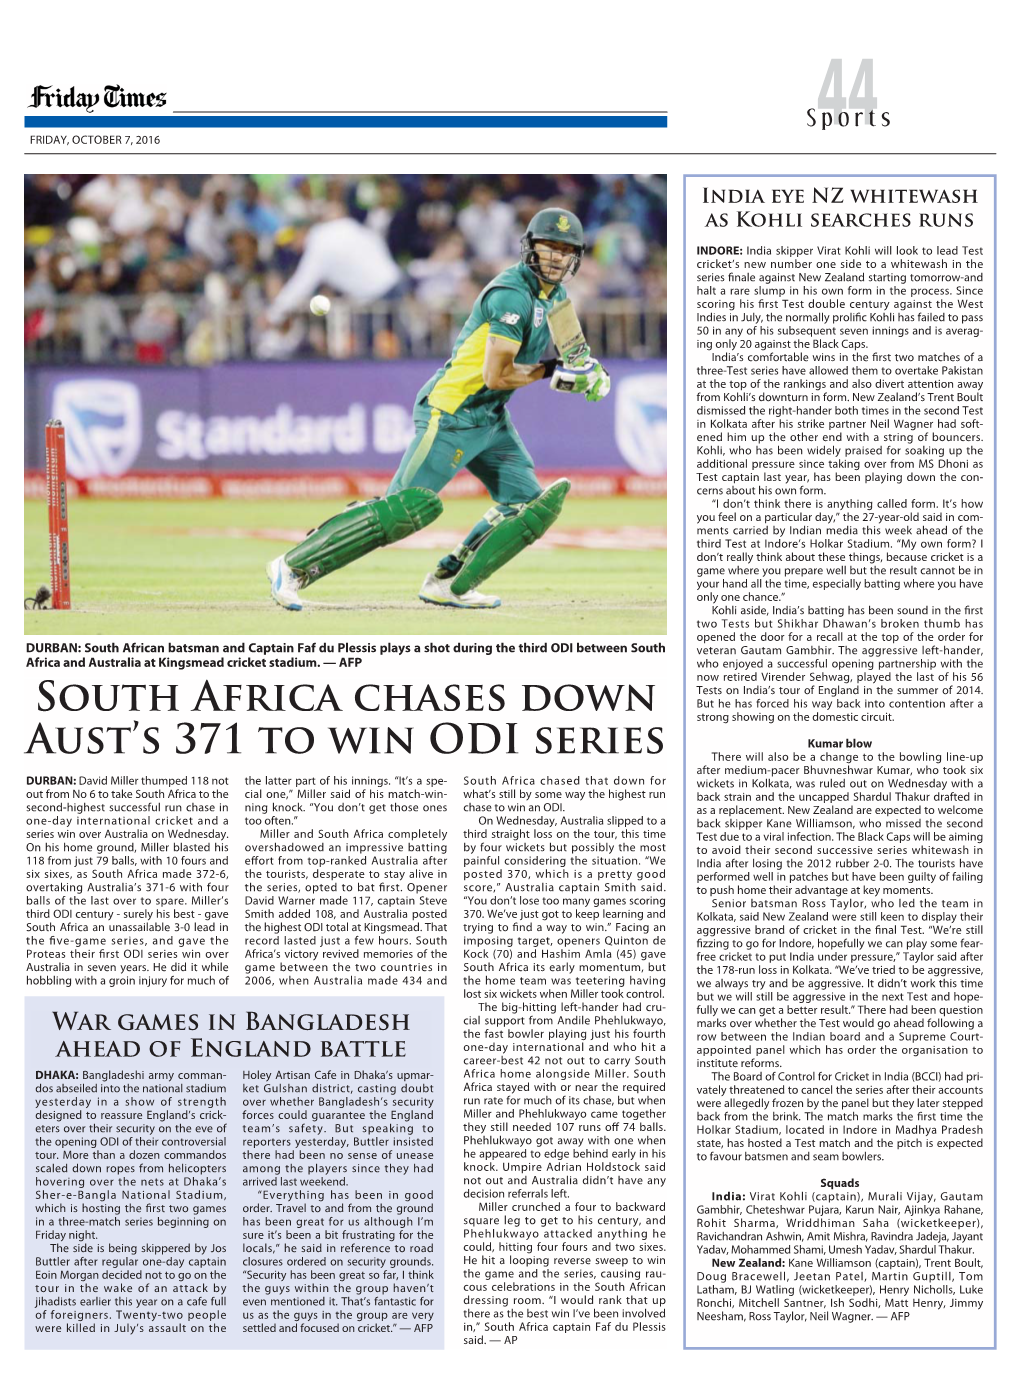 South Africa Chases Down Aust's 371 to Win ODI Series